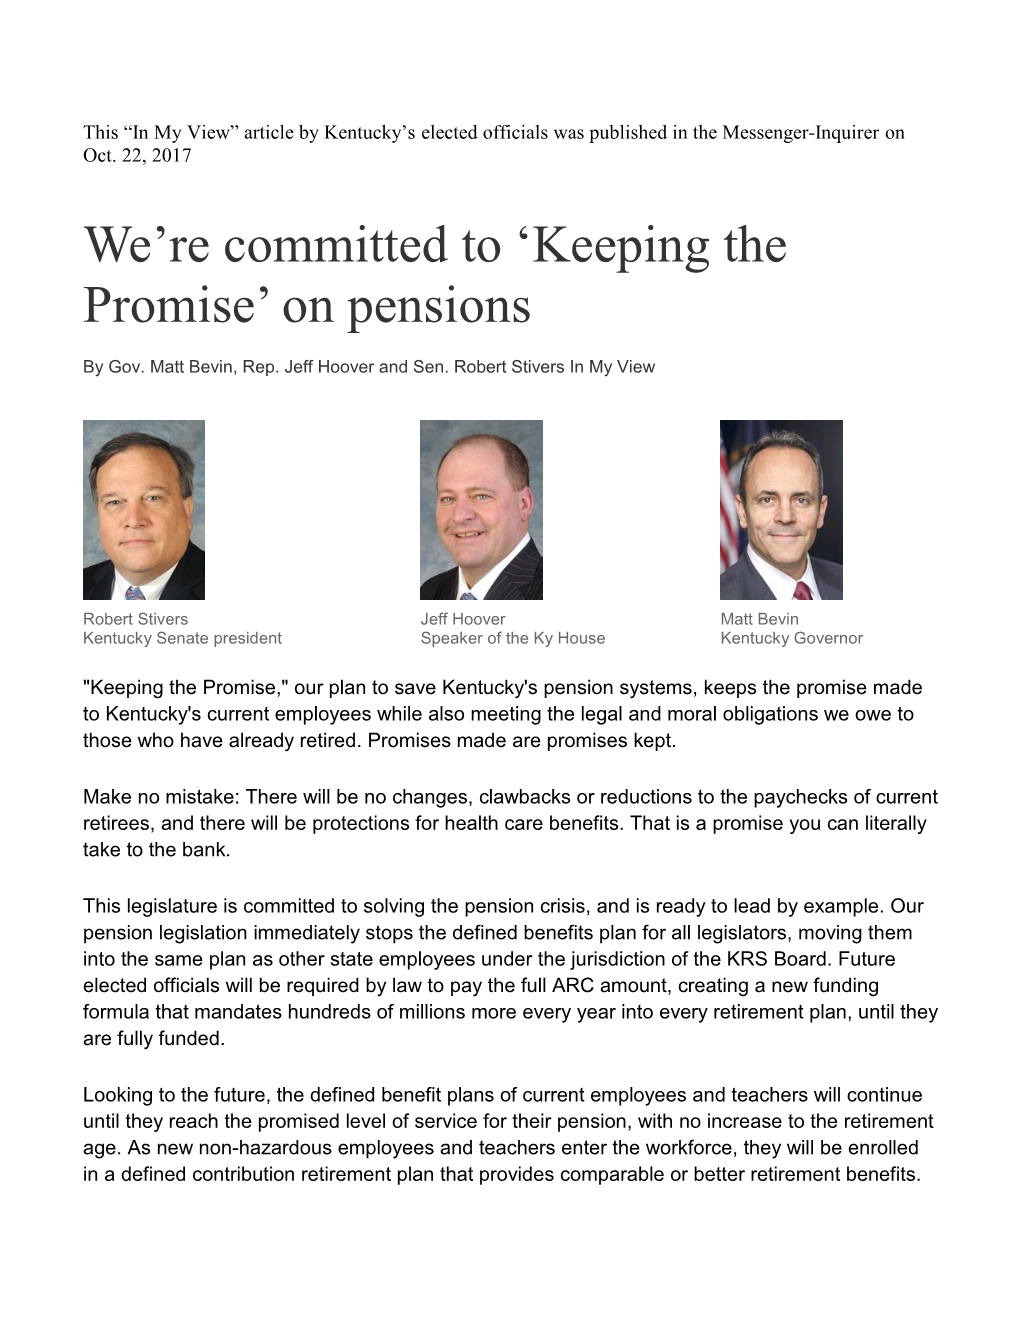 We're Committed to 'Keeping the Promise' on Pensions